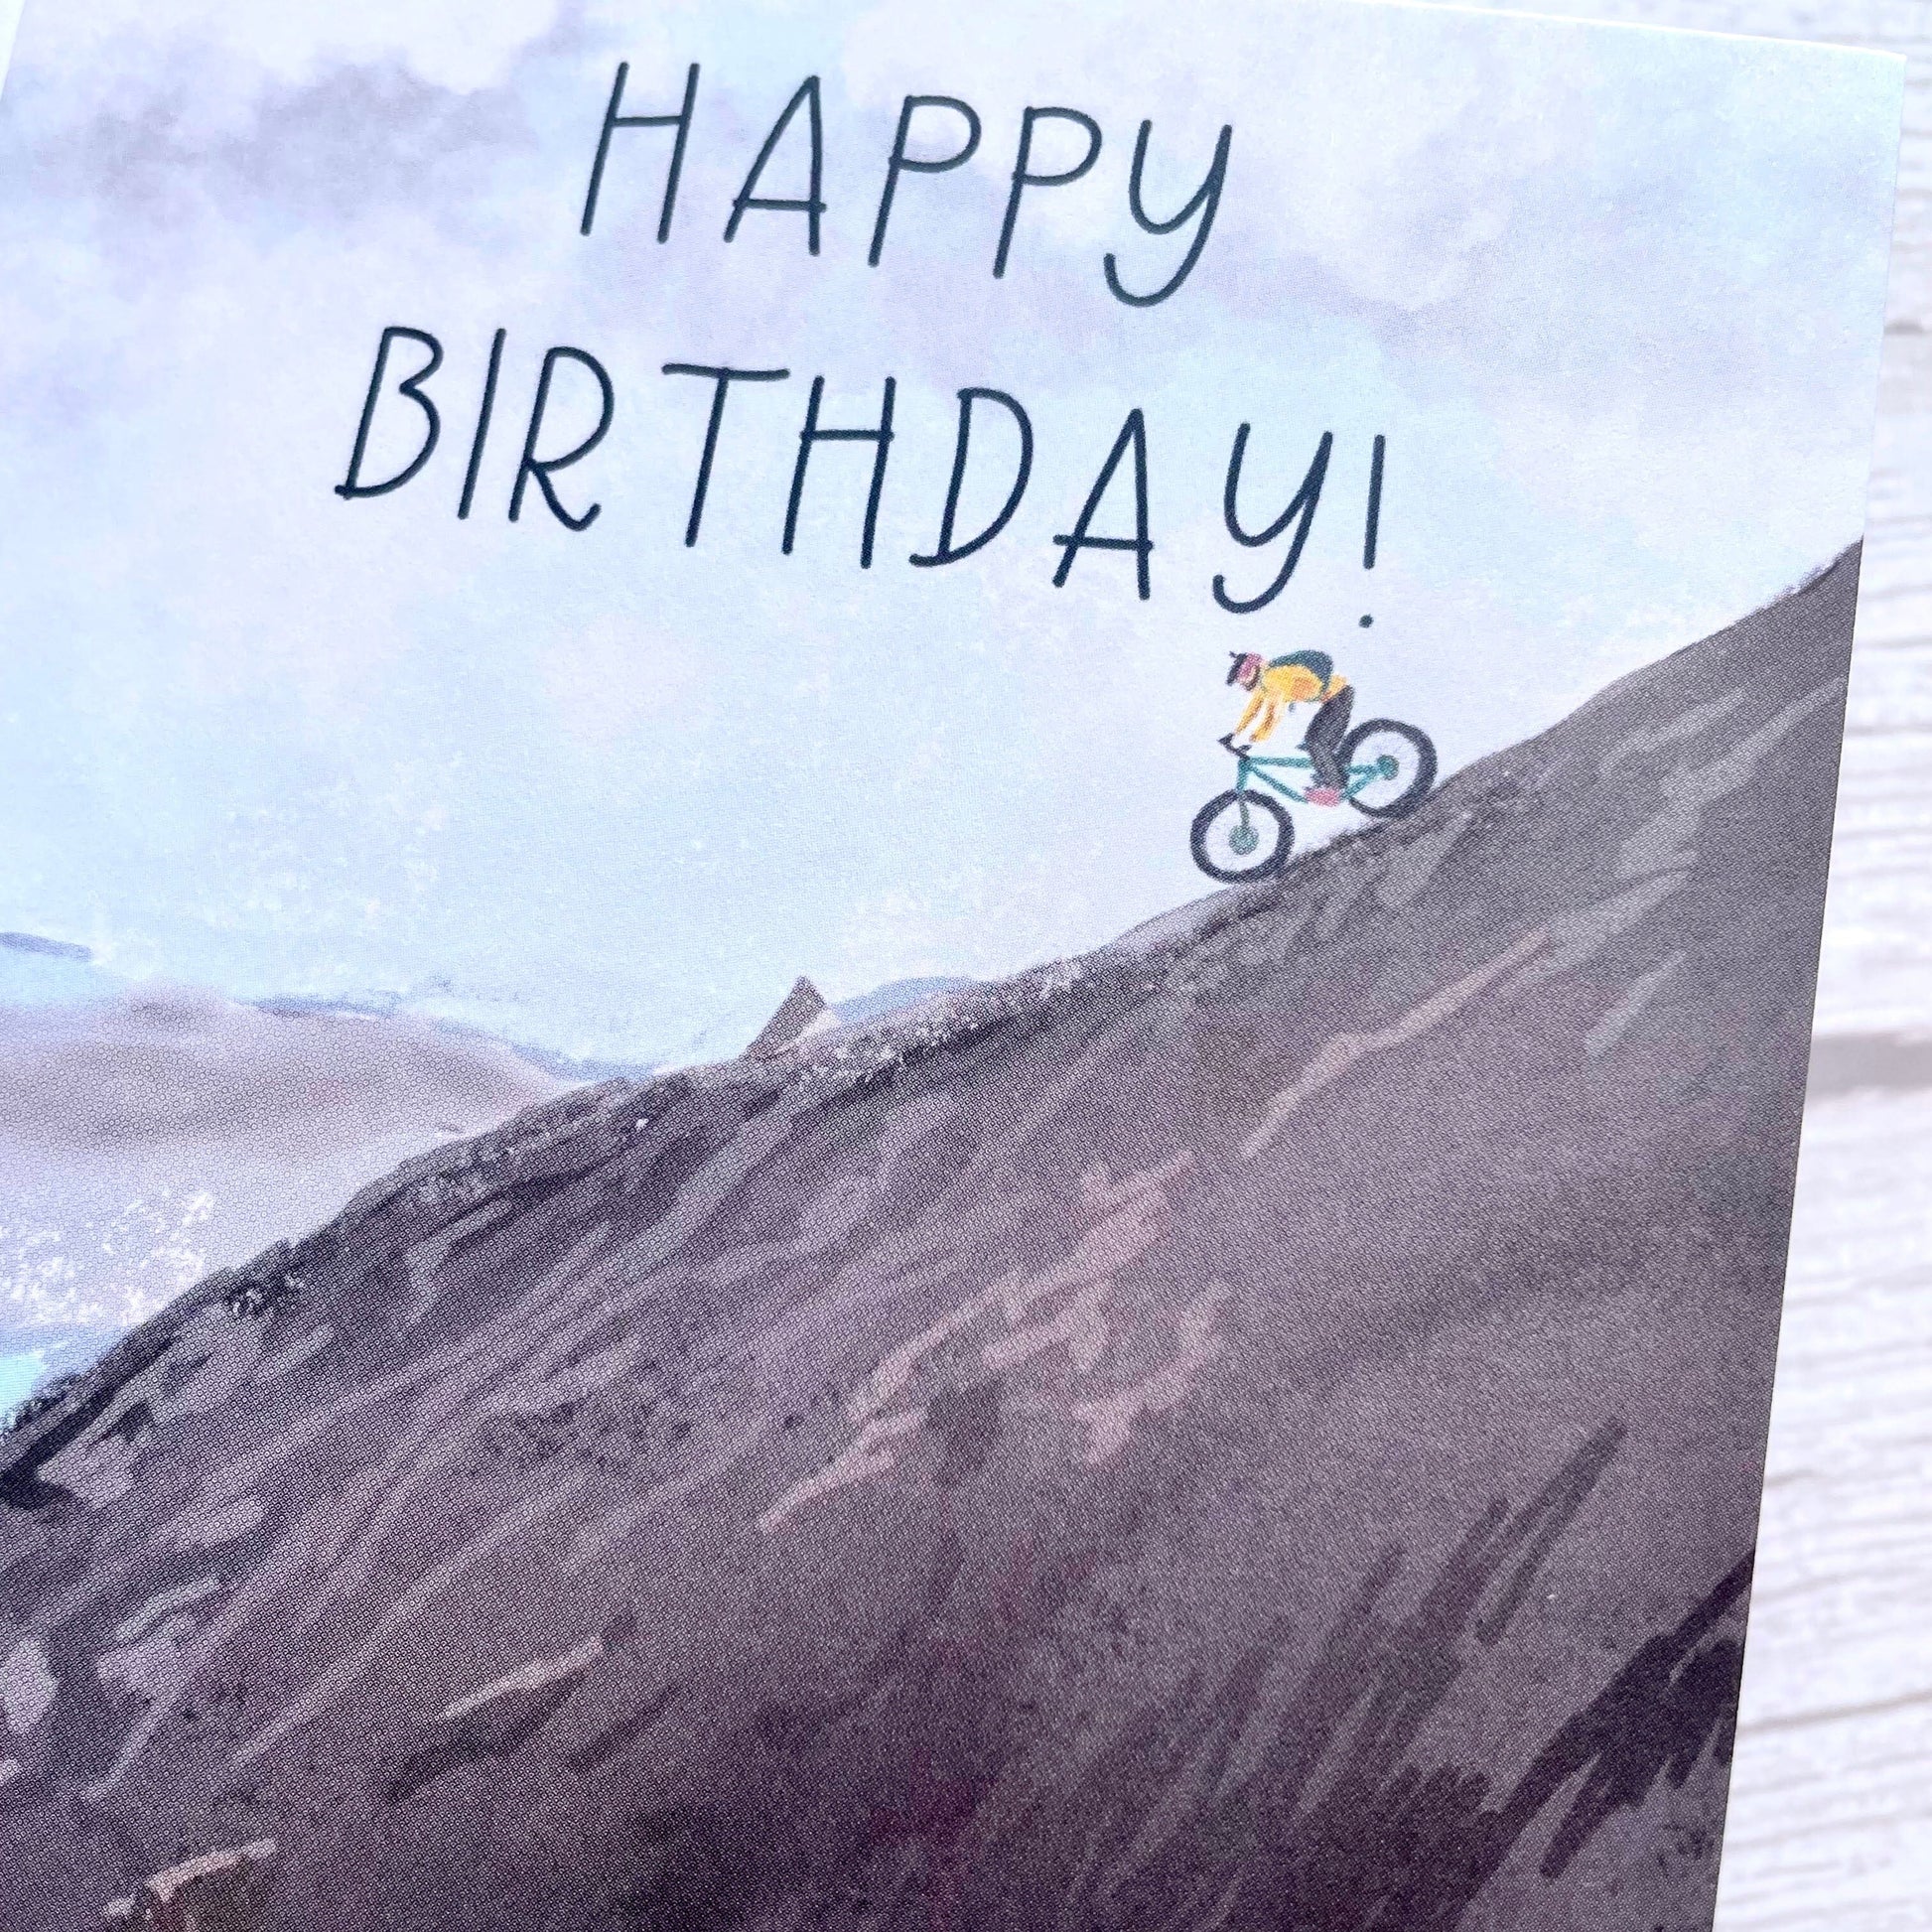 And Hope Designs Greeting & Note Cards Enjoy the ride cycling birthday card